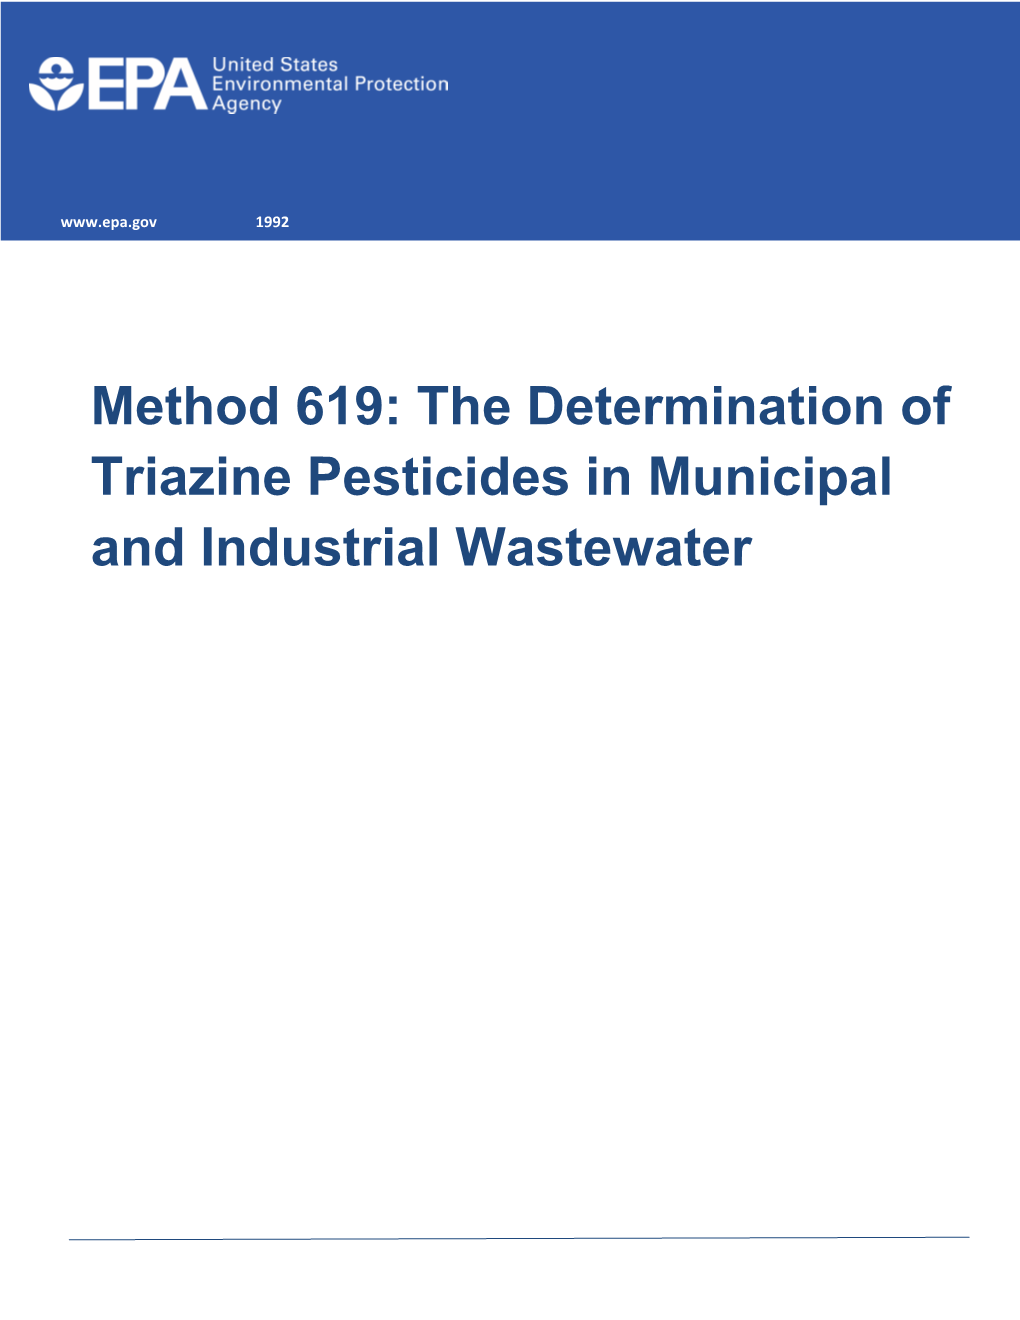 Method 619: the Determination of Triazine Pesticides in Municipal and Industrial Wastewater